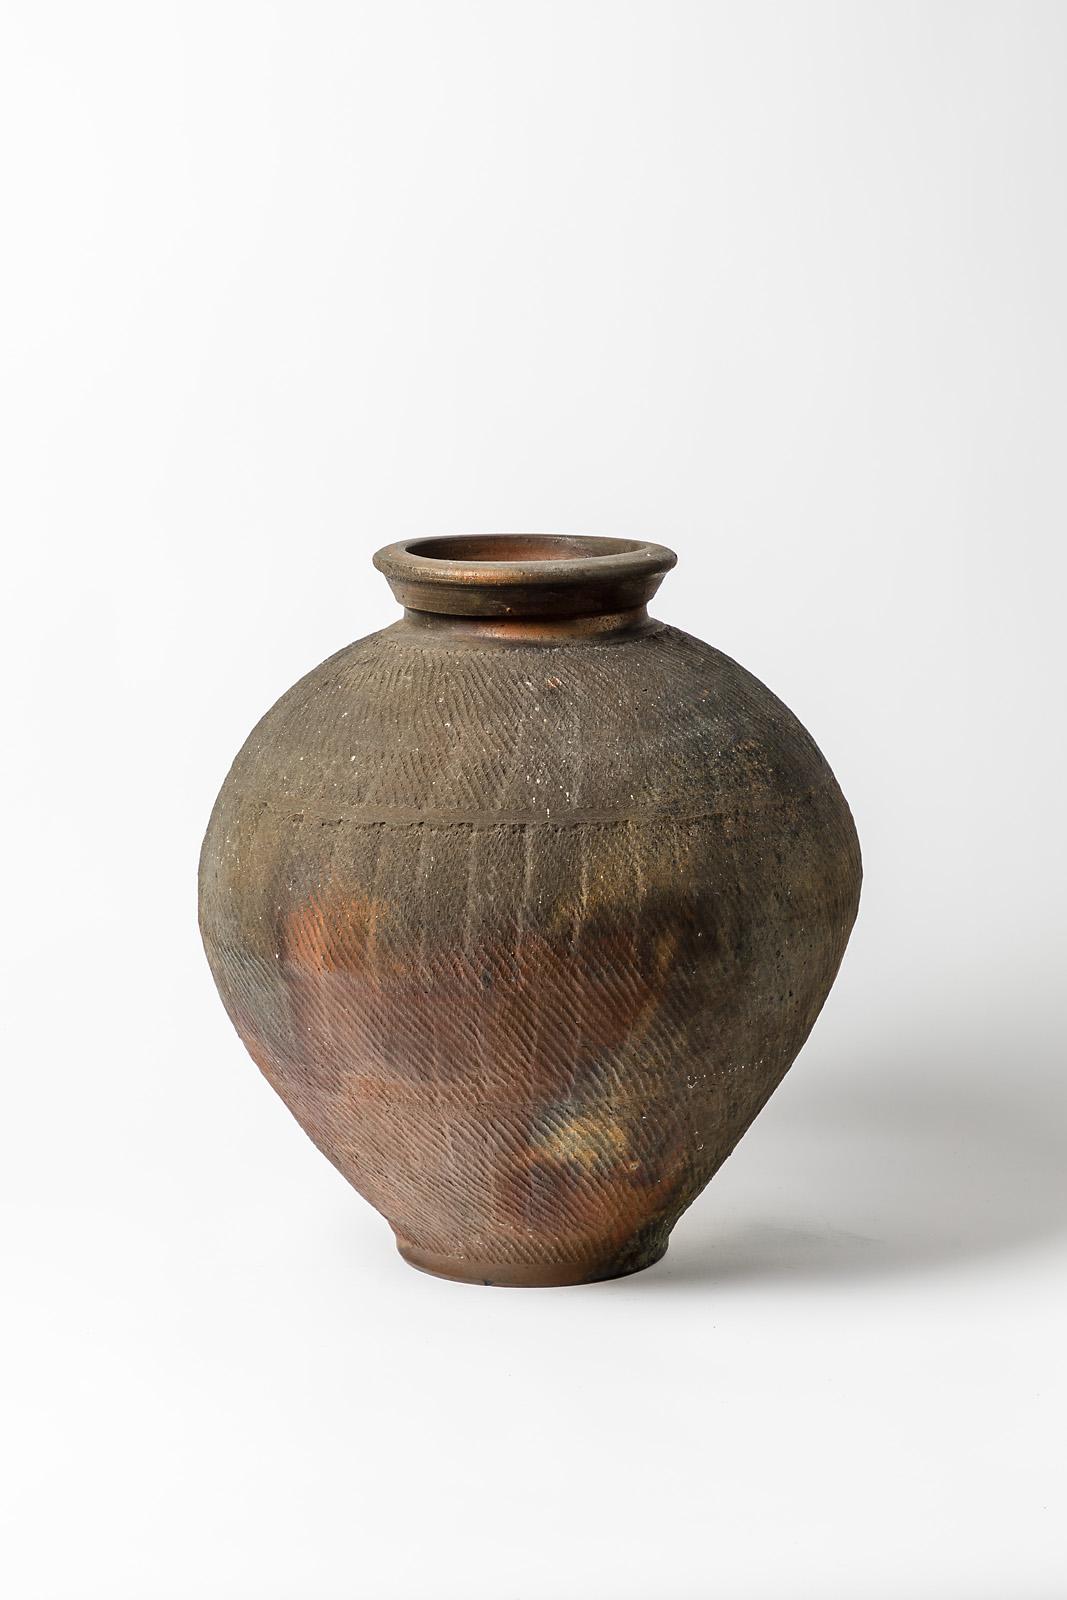 Steen Kepp - La Borne

Realised circa 1975-1980

Large brown and black stoneware ceramic floor vase.

Signed under the base

Original perfect condition

Measures: Height 40 cm
Large 33 cm.